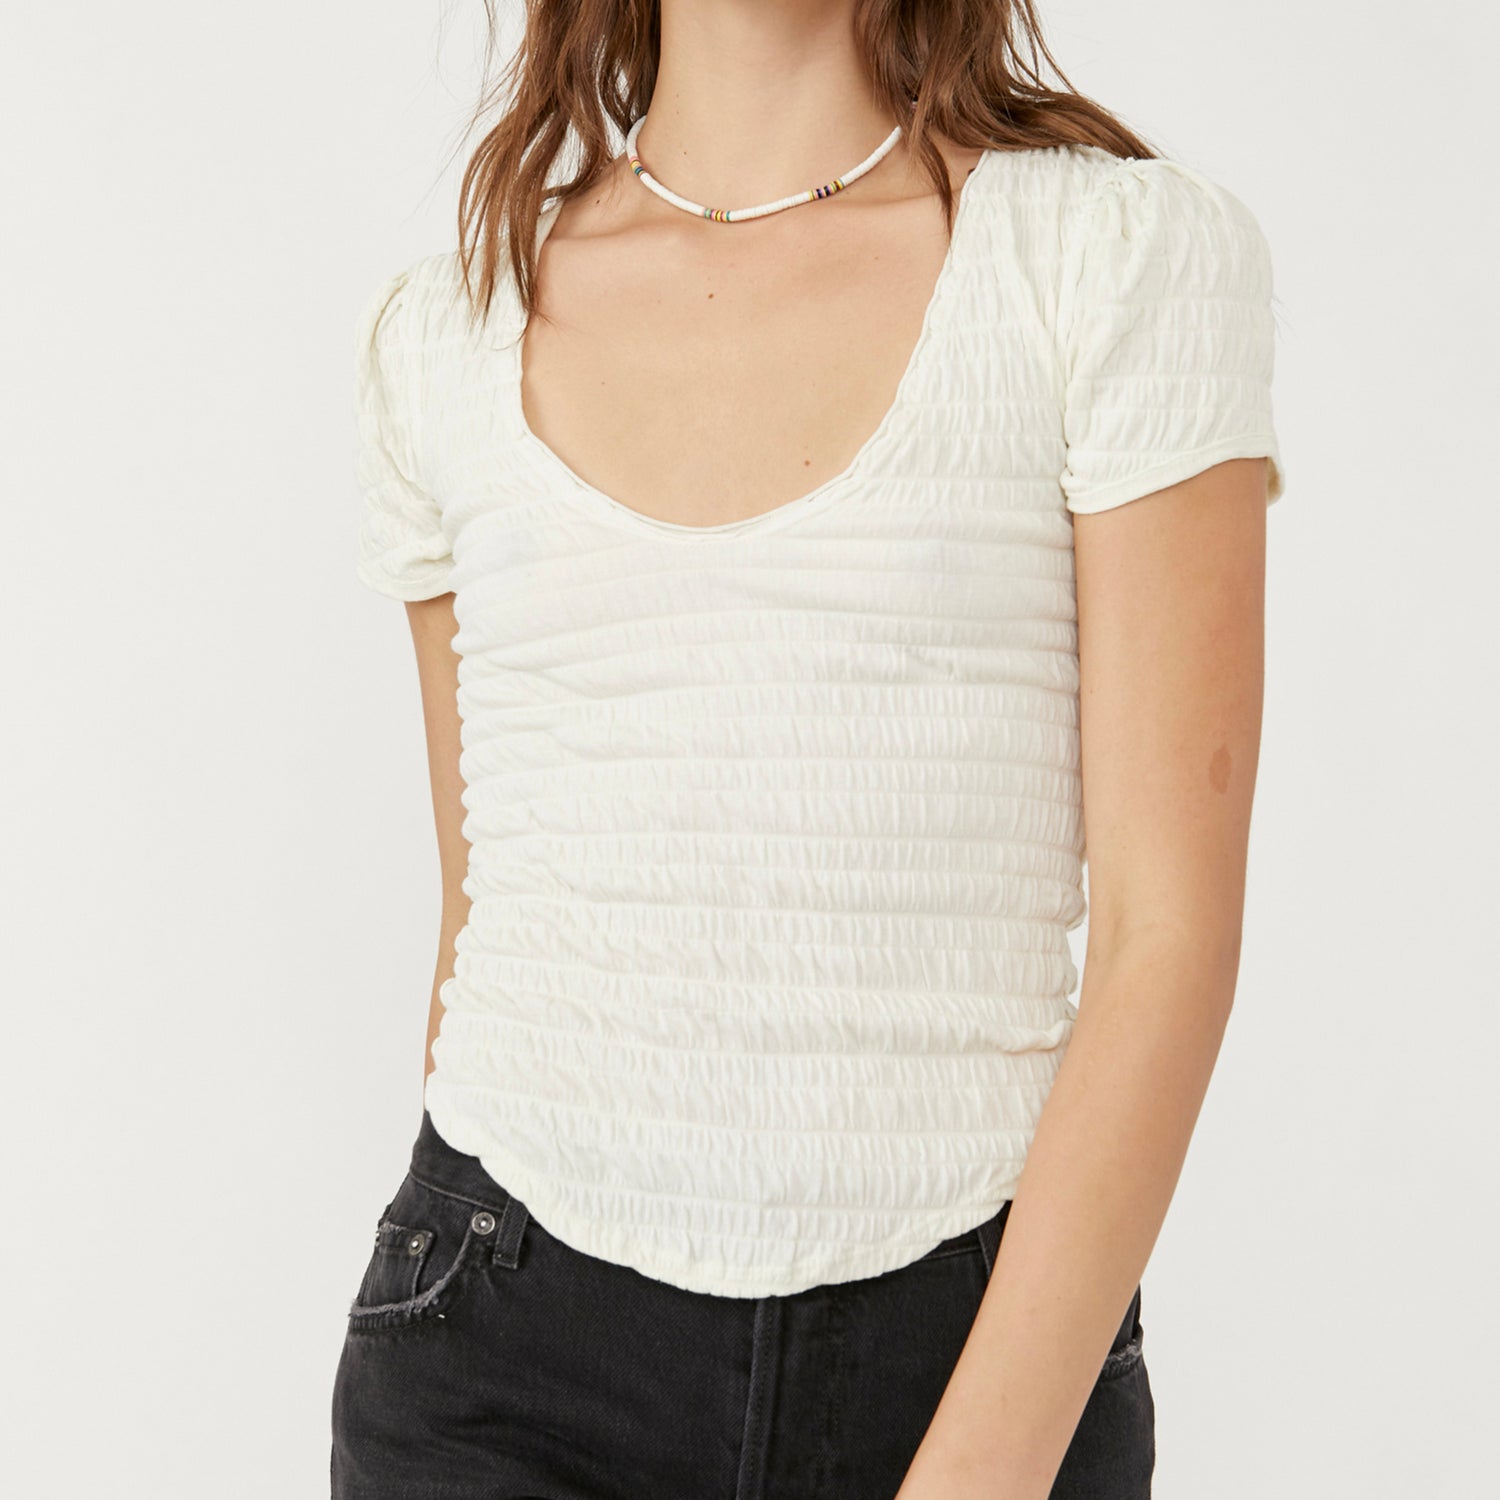 Free People Sugar Cube Tee. Just as special as it is versatile, this top is featured in a boxy, cropped design and stunning lace fabrication with tulle and ruffled sleeves for added dimension